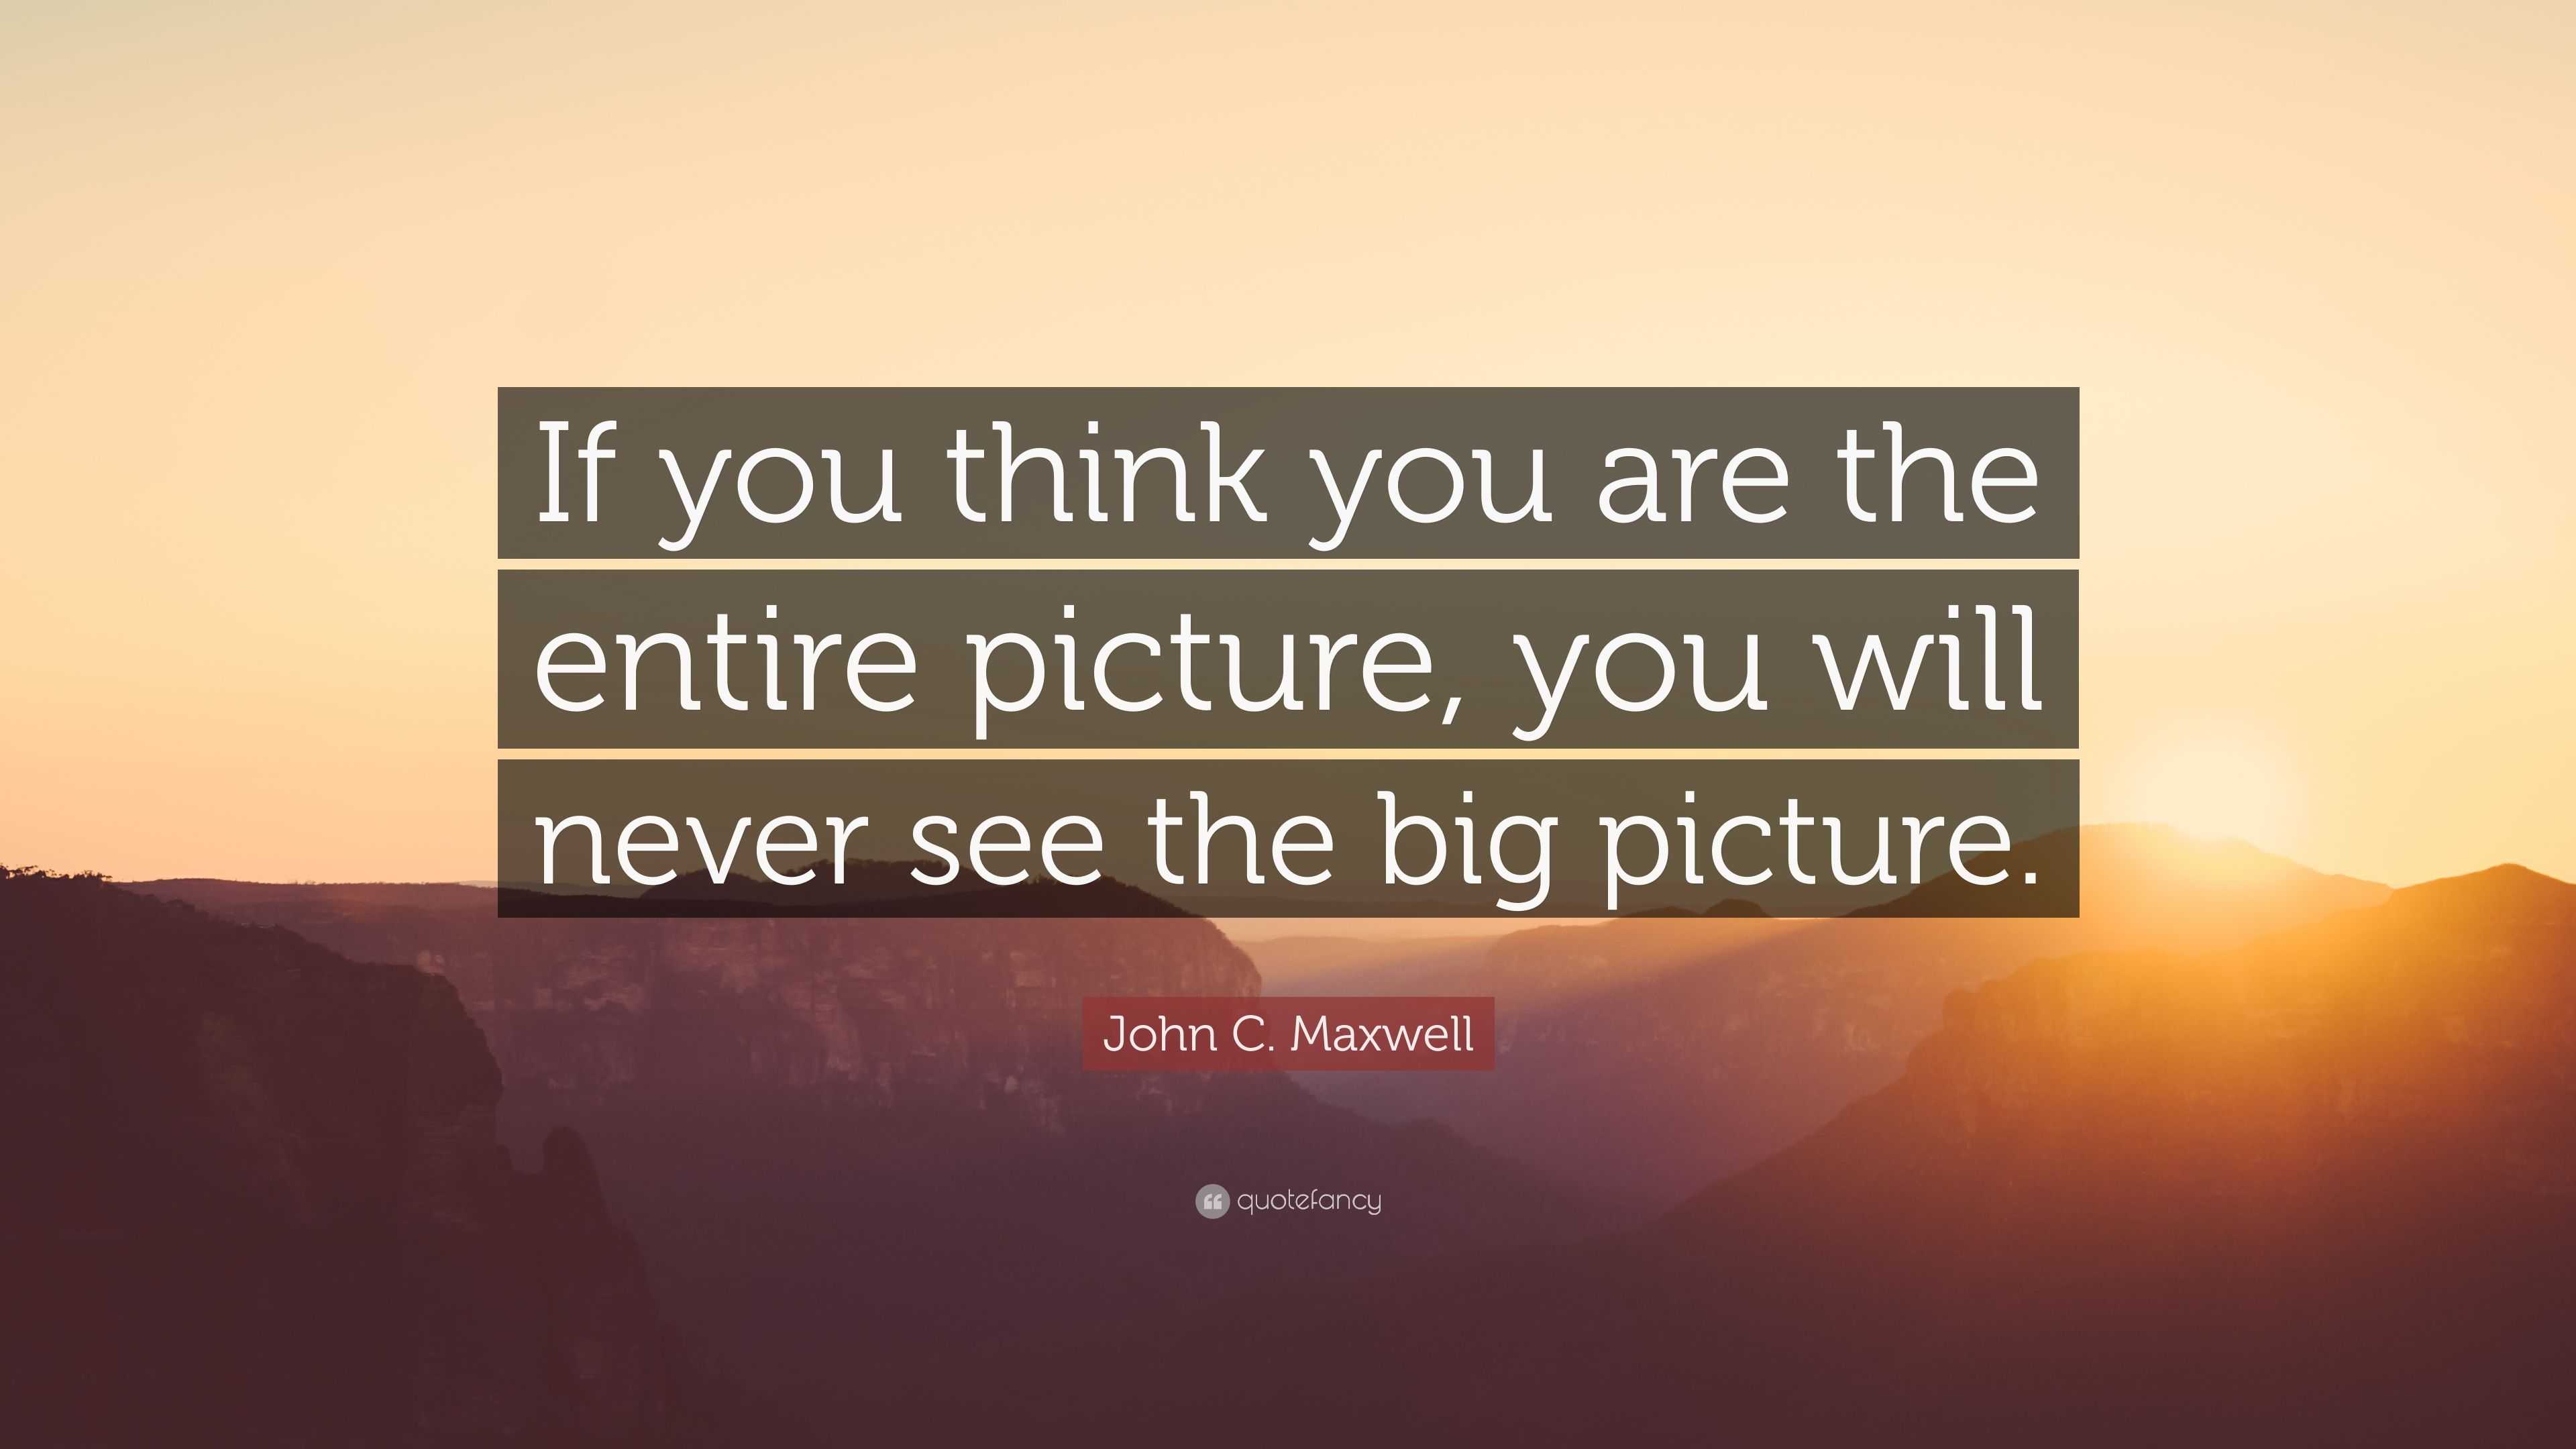 John C. Maxwell Quote: “If you think you are the entire picture, you ...